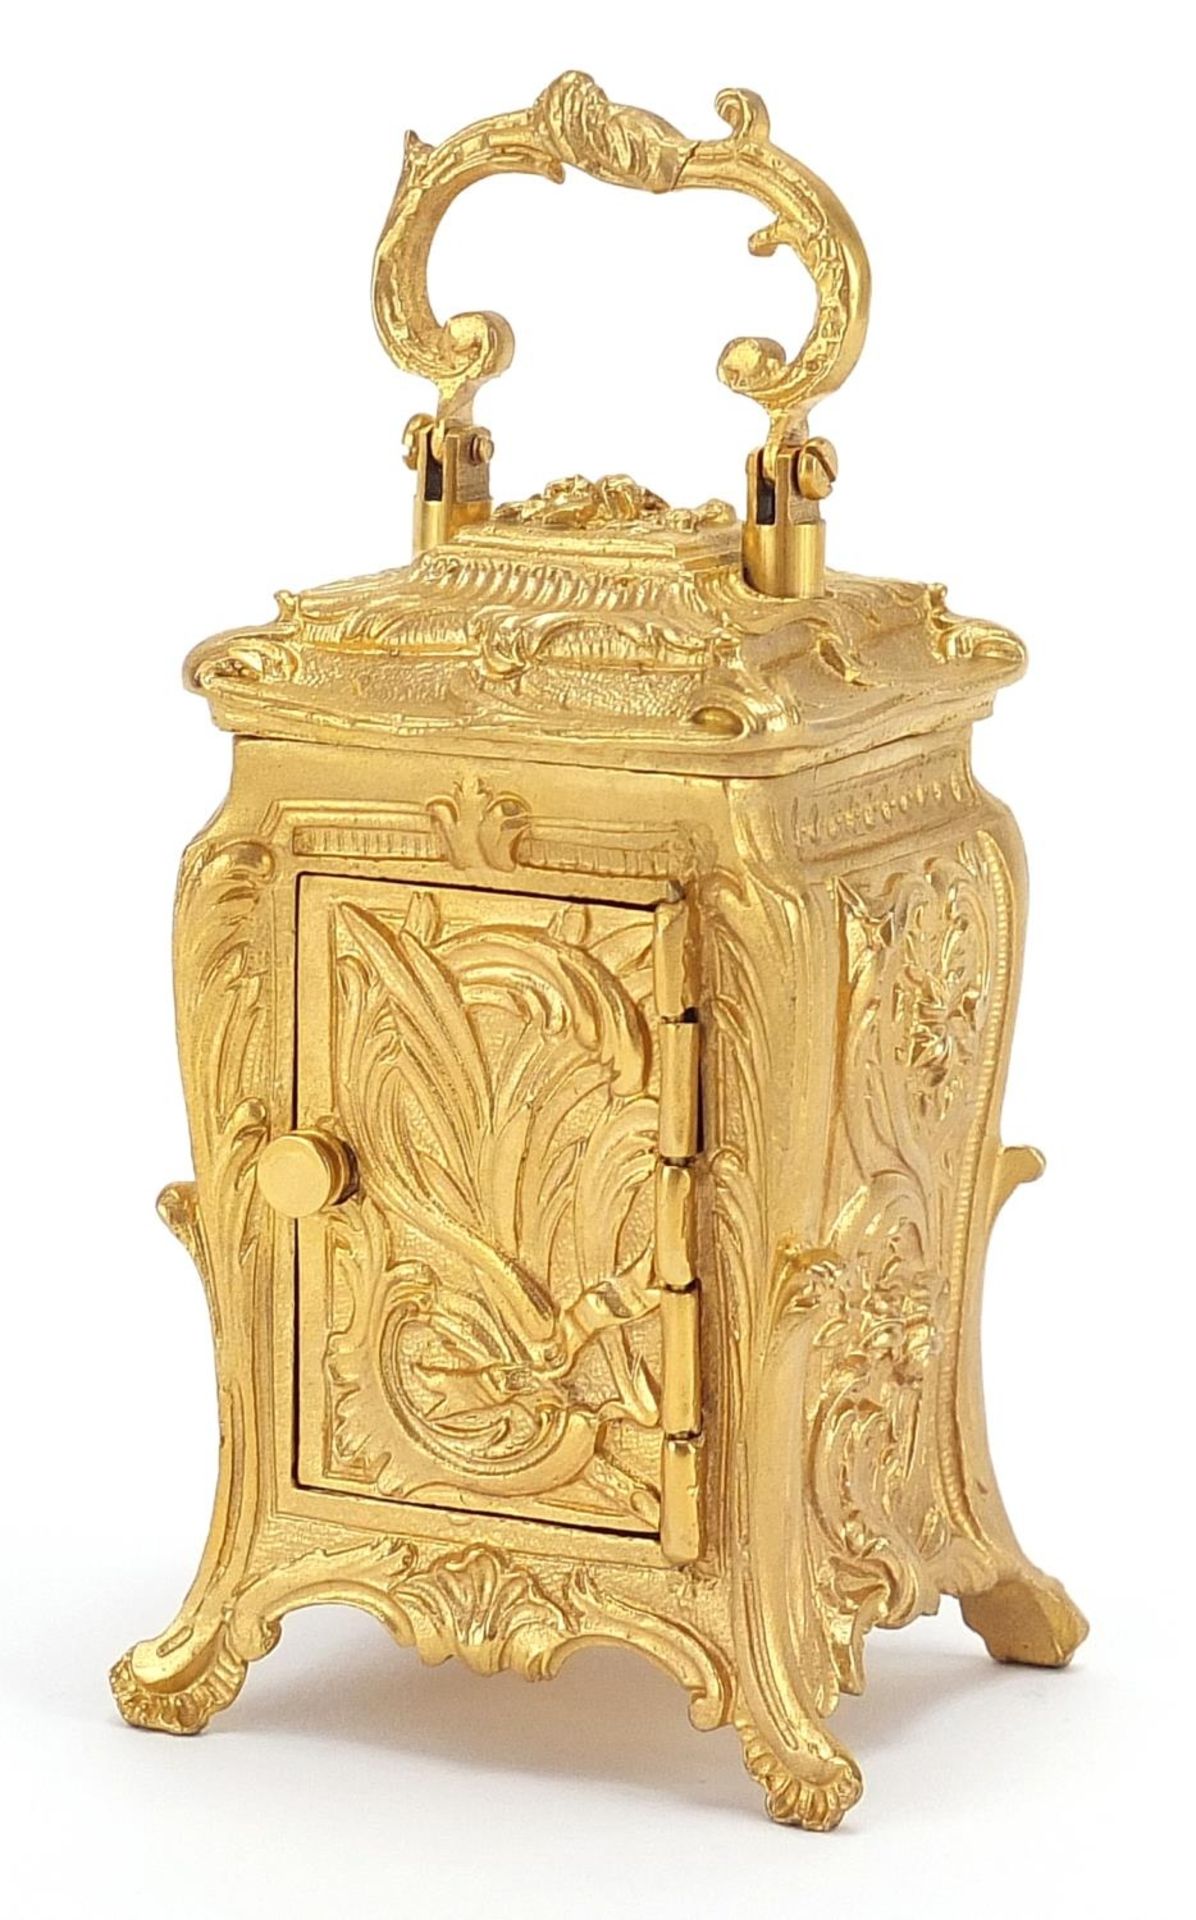 Miniature gilt brass Rococo style carriage clock, 8cm high - Image 2 of 4